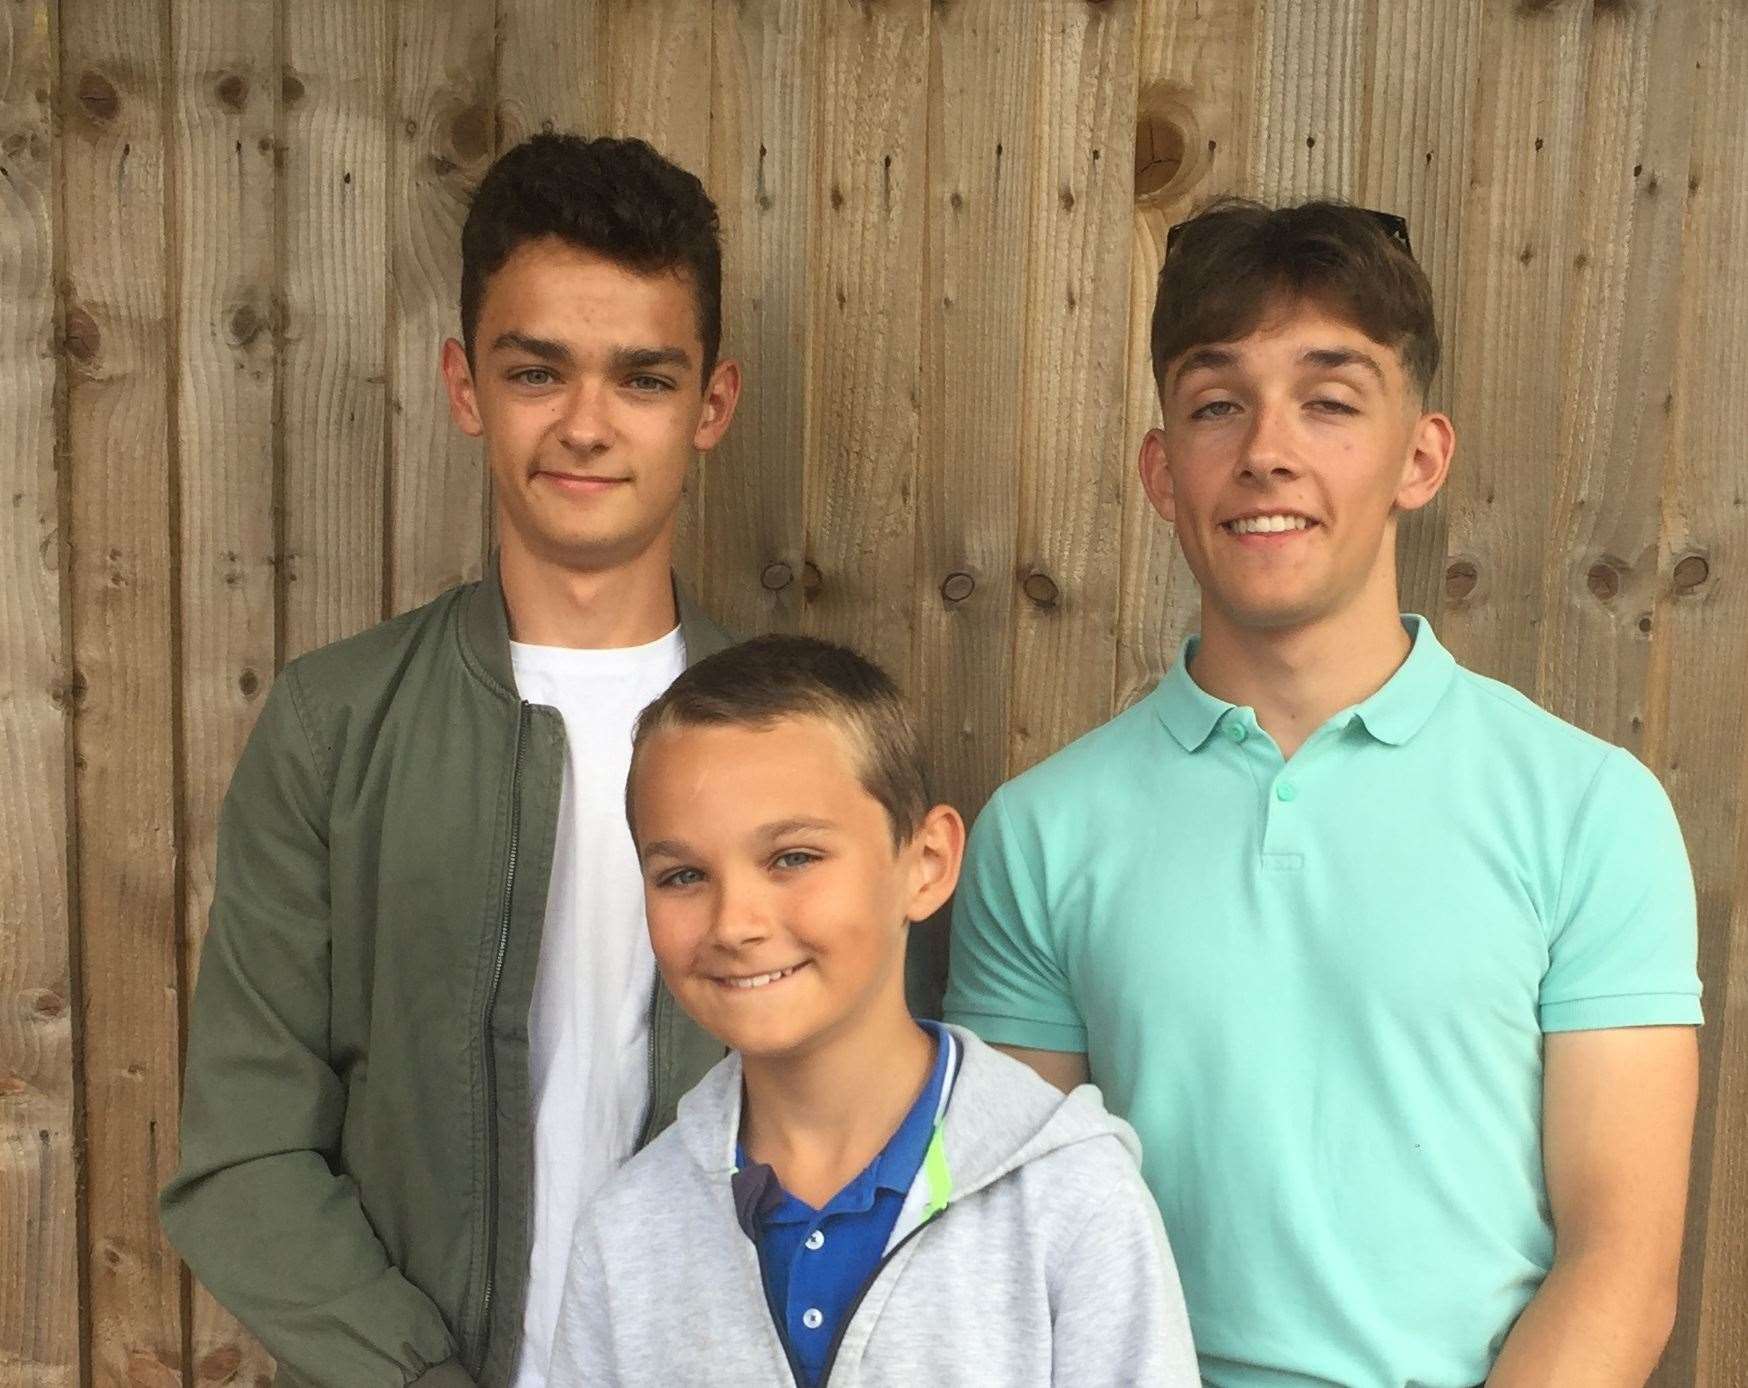 Toby Smith, 12, with brothers Jake and Luke, both 18. Picture: Barton Court